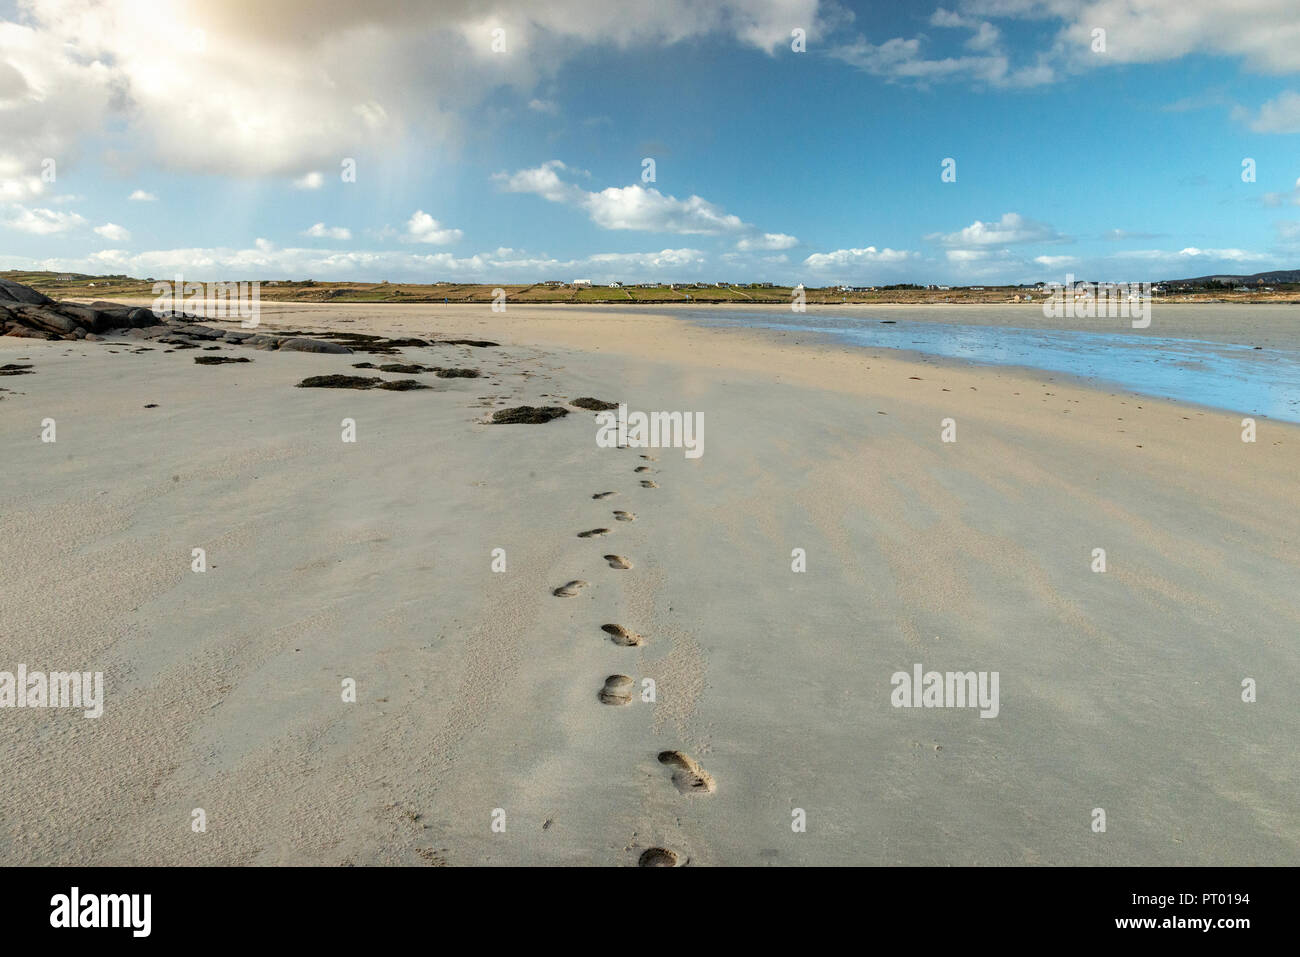 Europe, Ireland,  Connemara, Omey Island , It is possible to drive or walk across a large sandy strand to the island by following the arrowed signs. Stock Photo